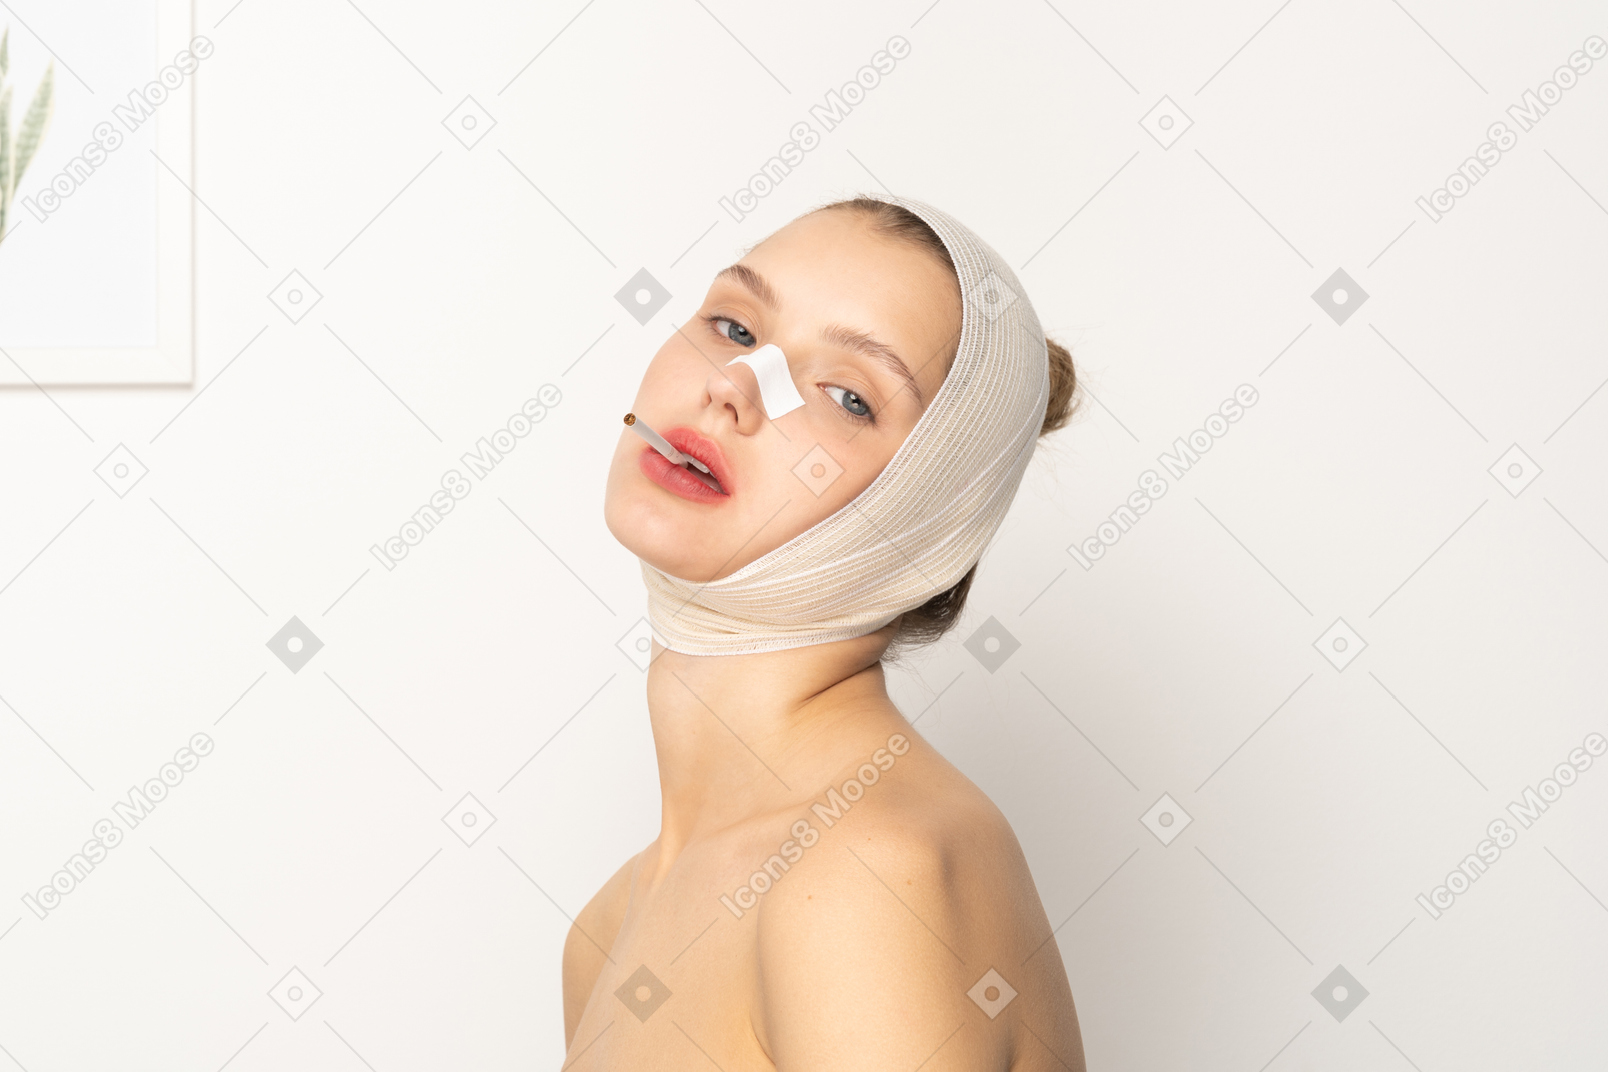 Young woman with bandaged head smoking a cigarette